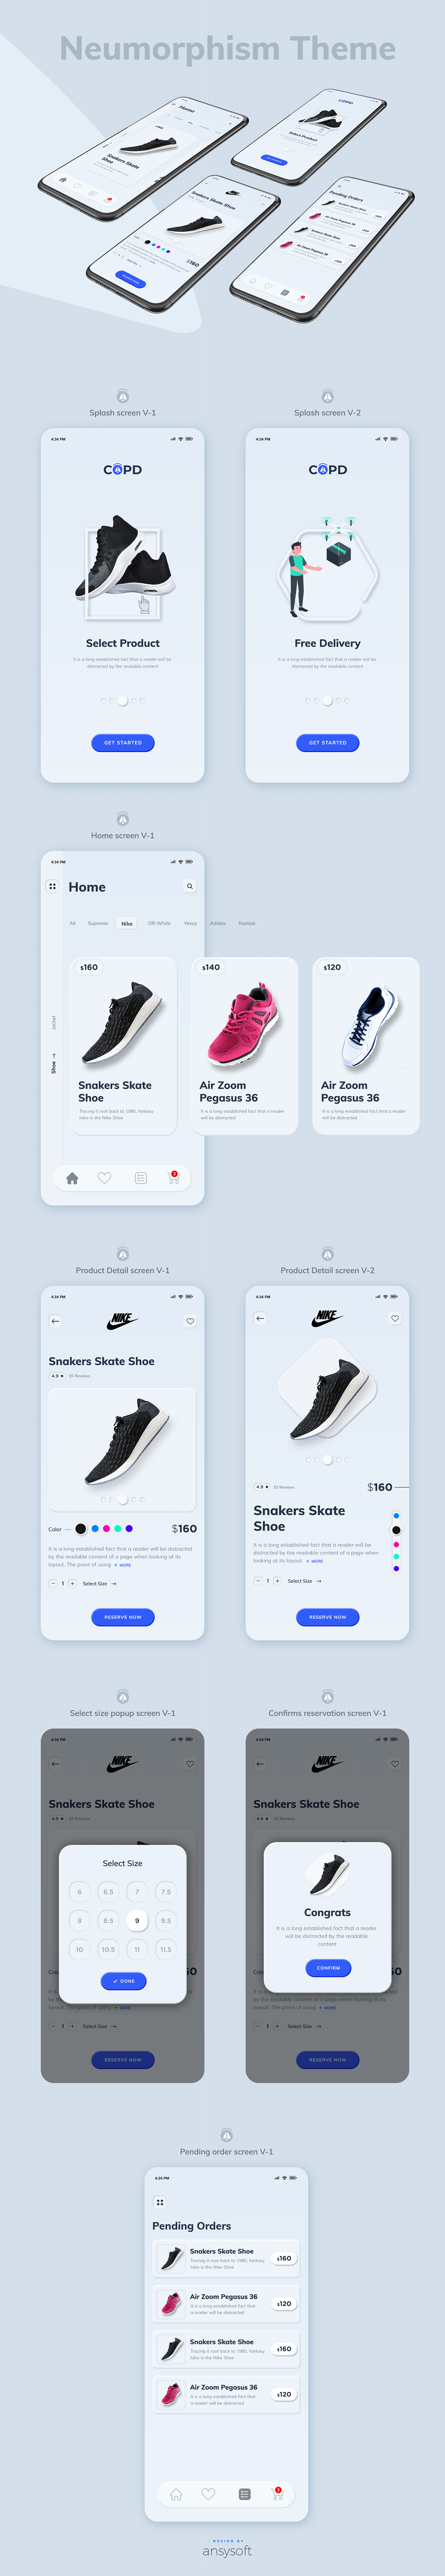 sneaker bot iPhone Mobile App Online eCommerce Store consumer customer Adobe XD purchase shoe online neumorphism theme black and white simple modern futuristic reserve product